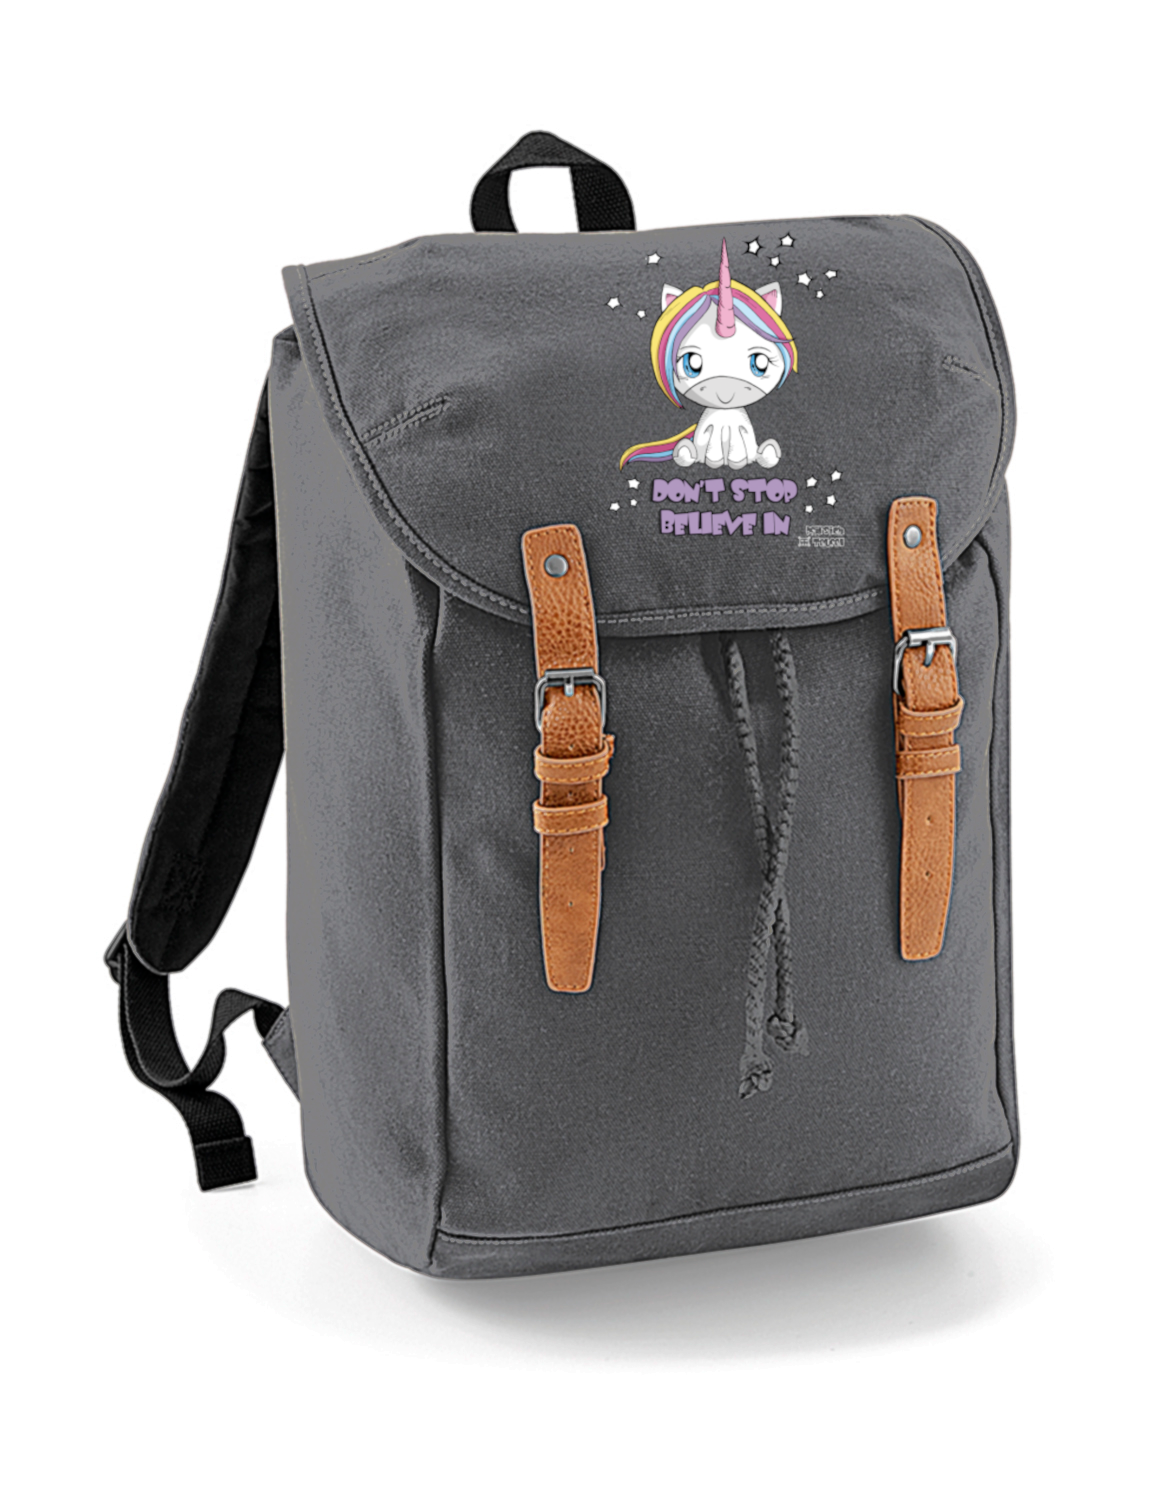 Rucksack Canvas Don't Stop Belive In grau